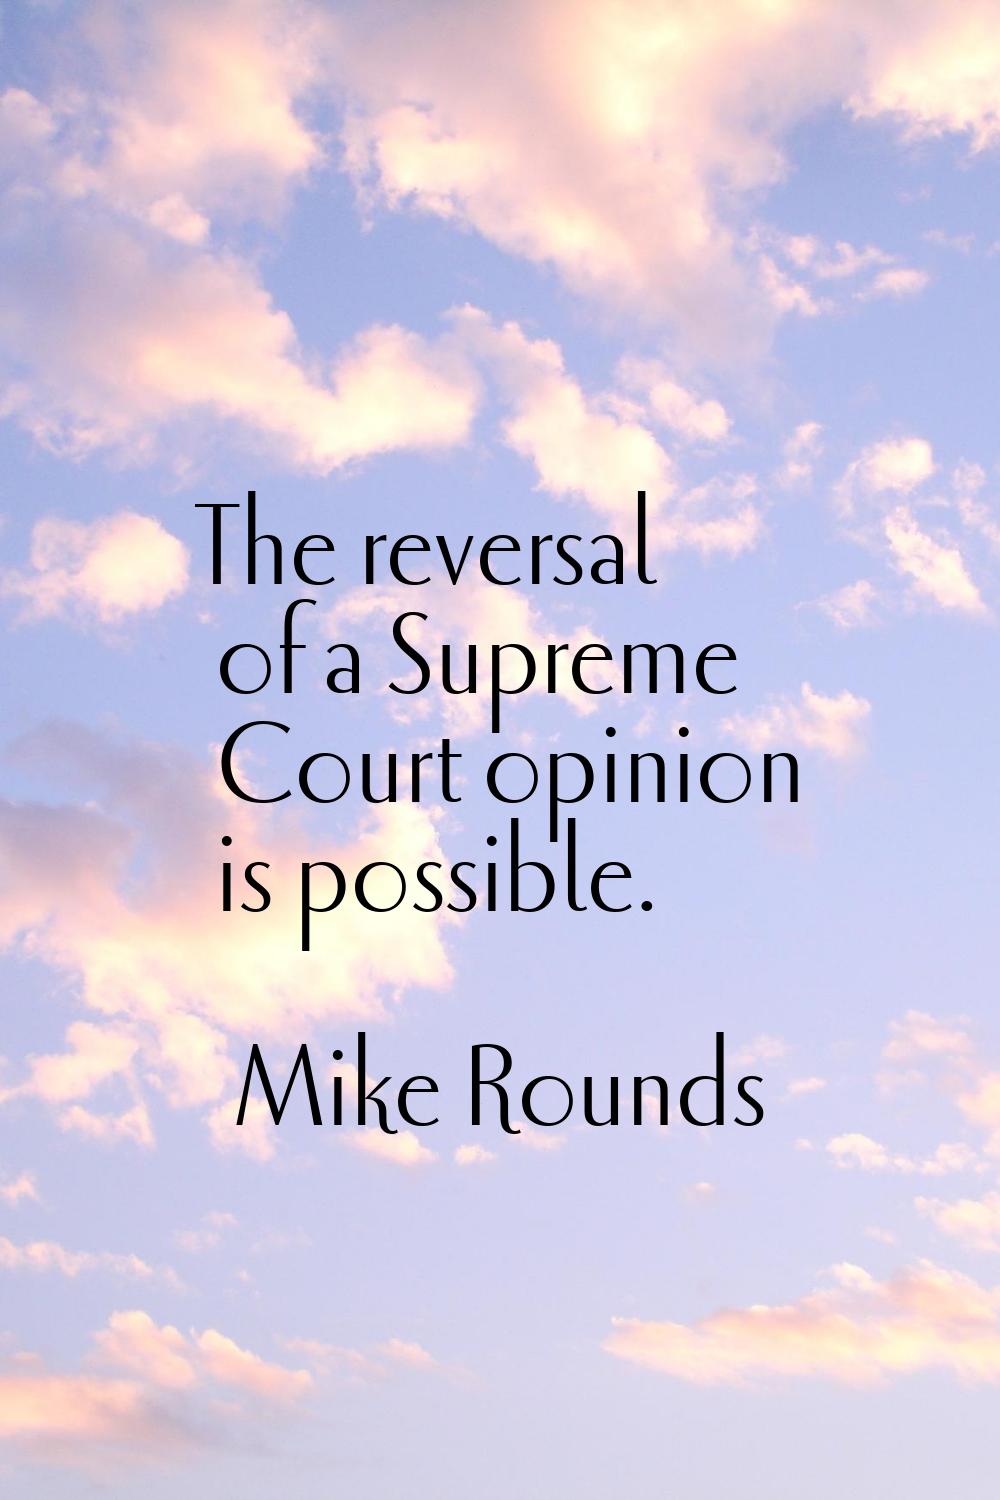 The reversal of a Supreme Court opinion is possible.